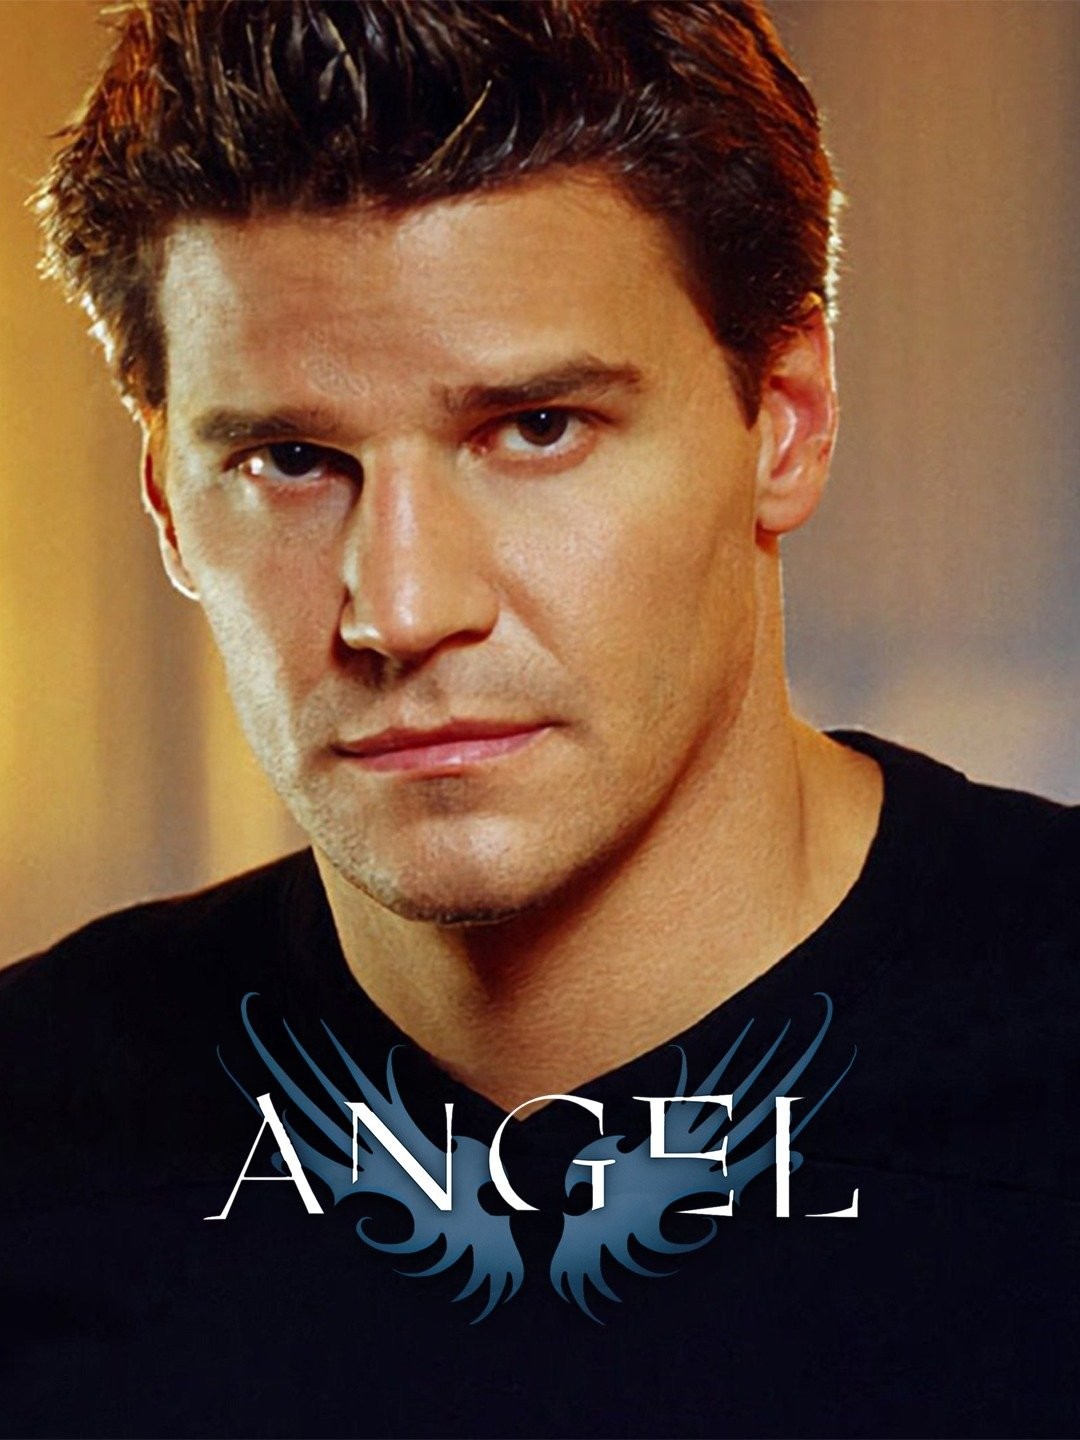 One Room Angel (2023): ratings and release dates for each episode